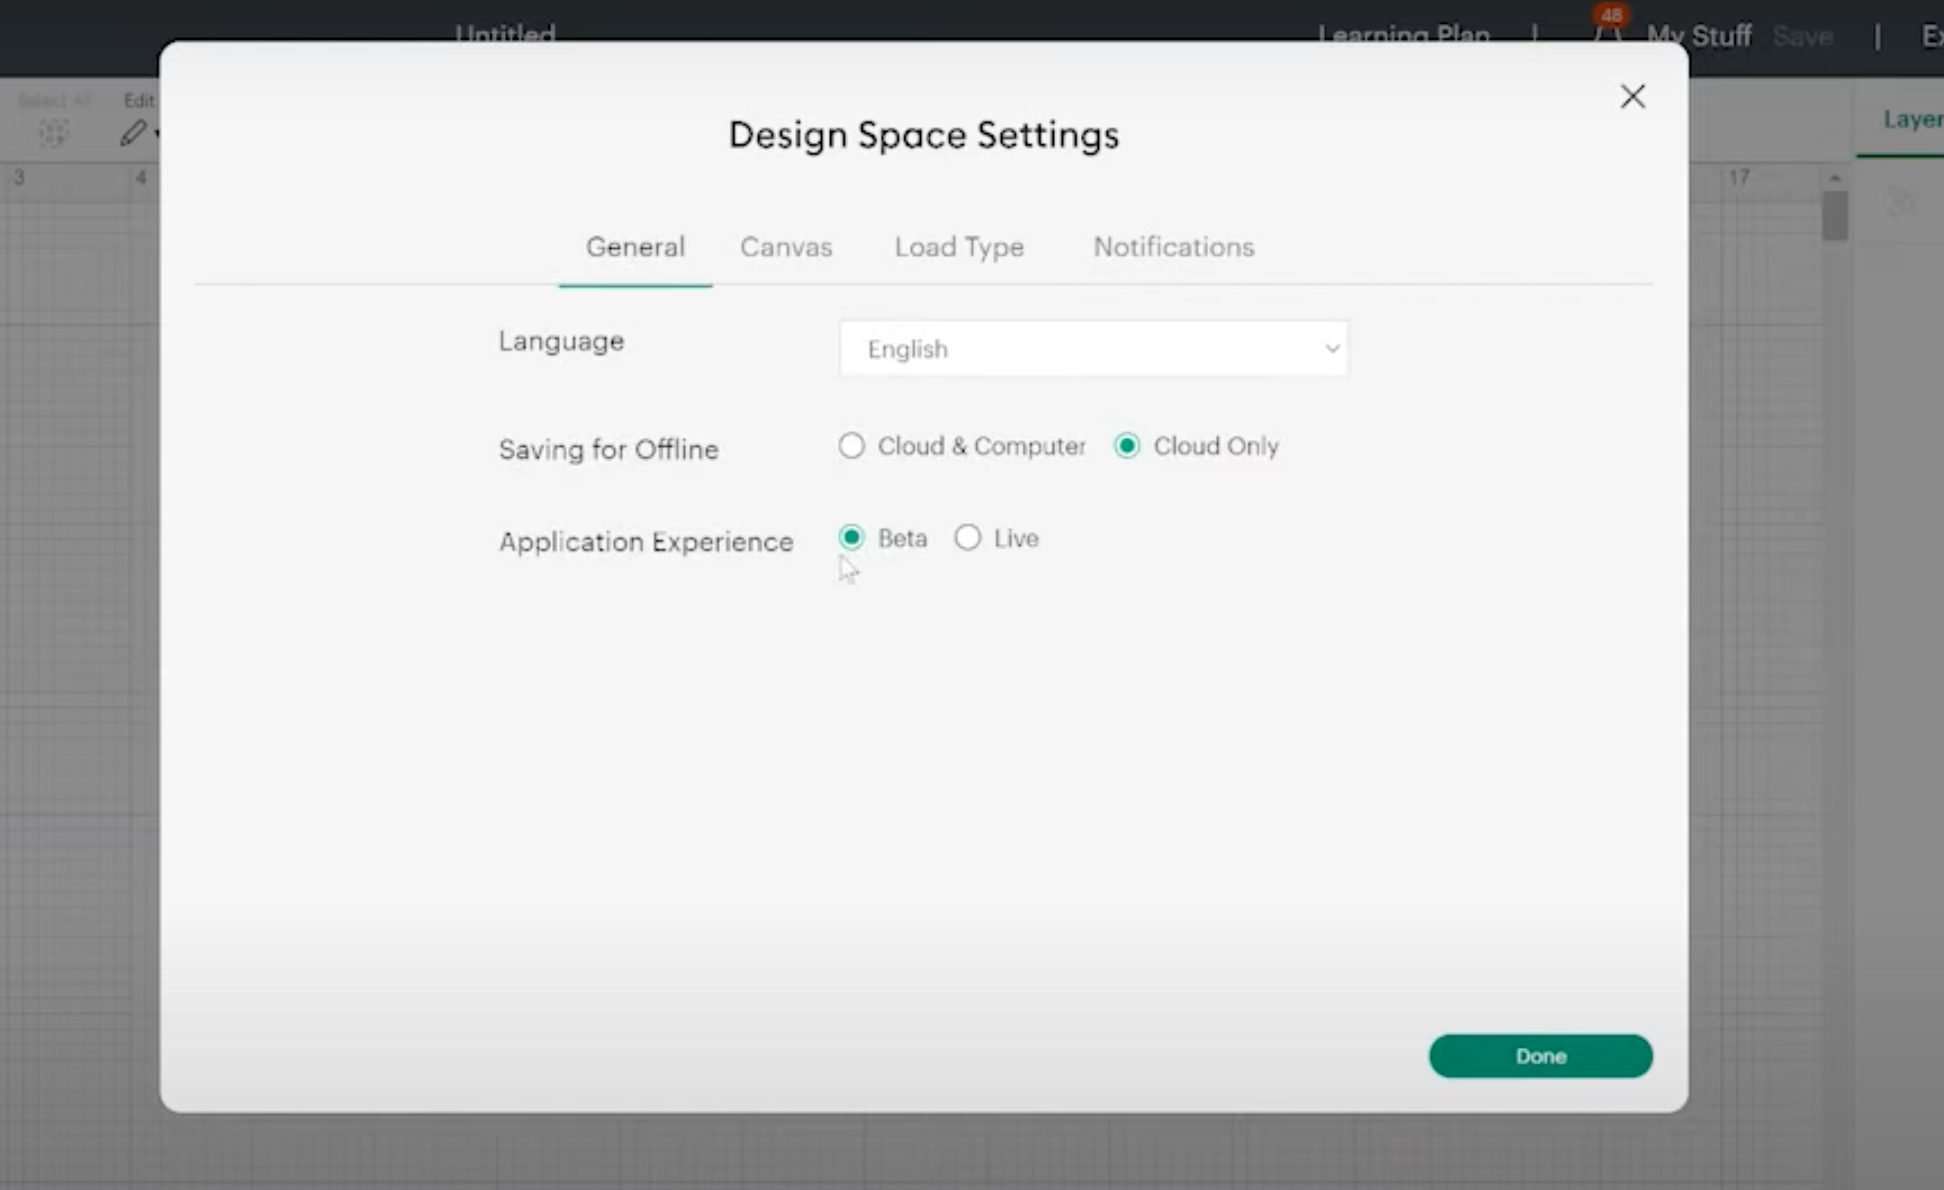 Changing Design Space from Live to Beta version.